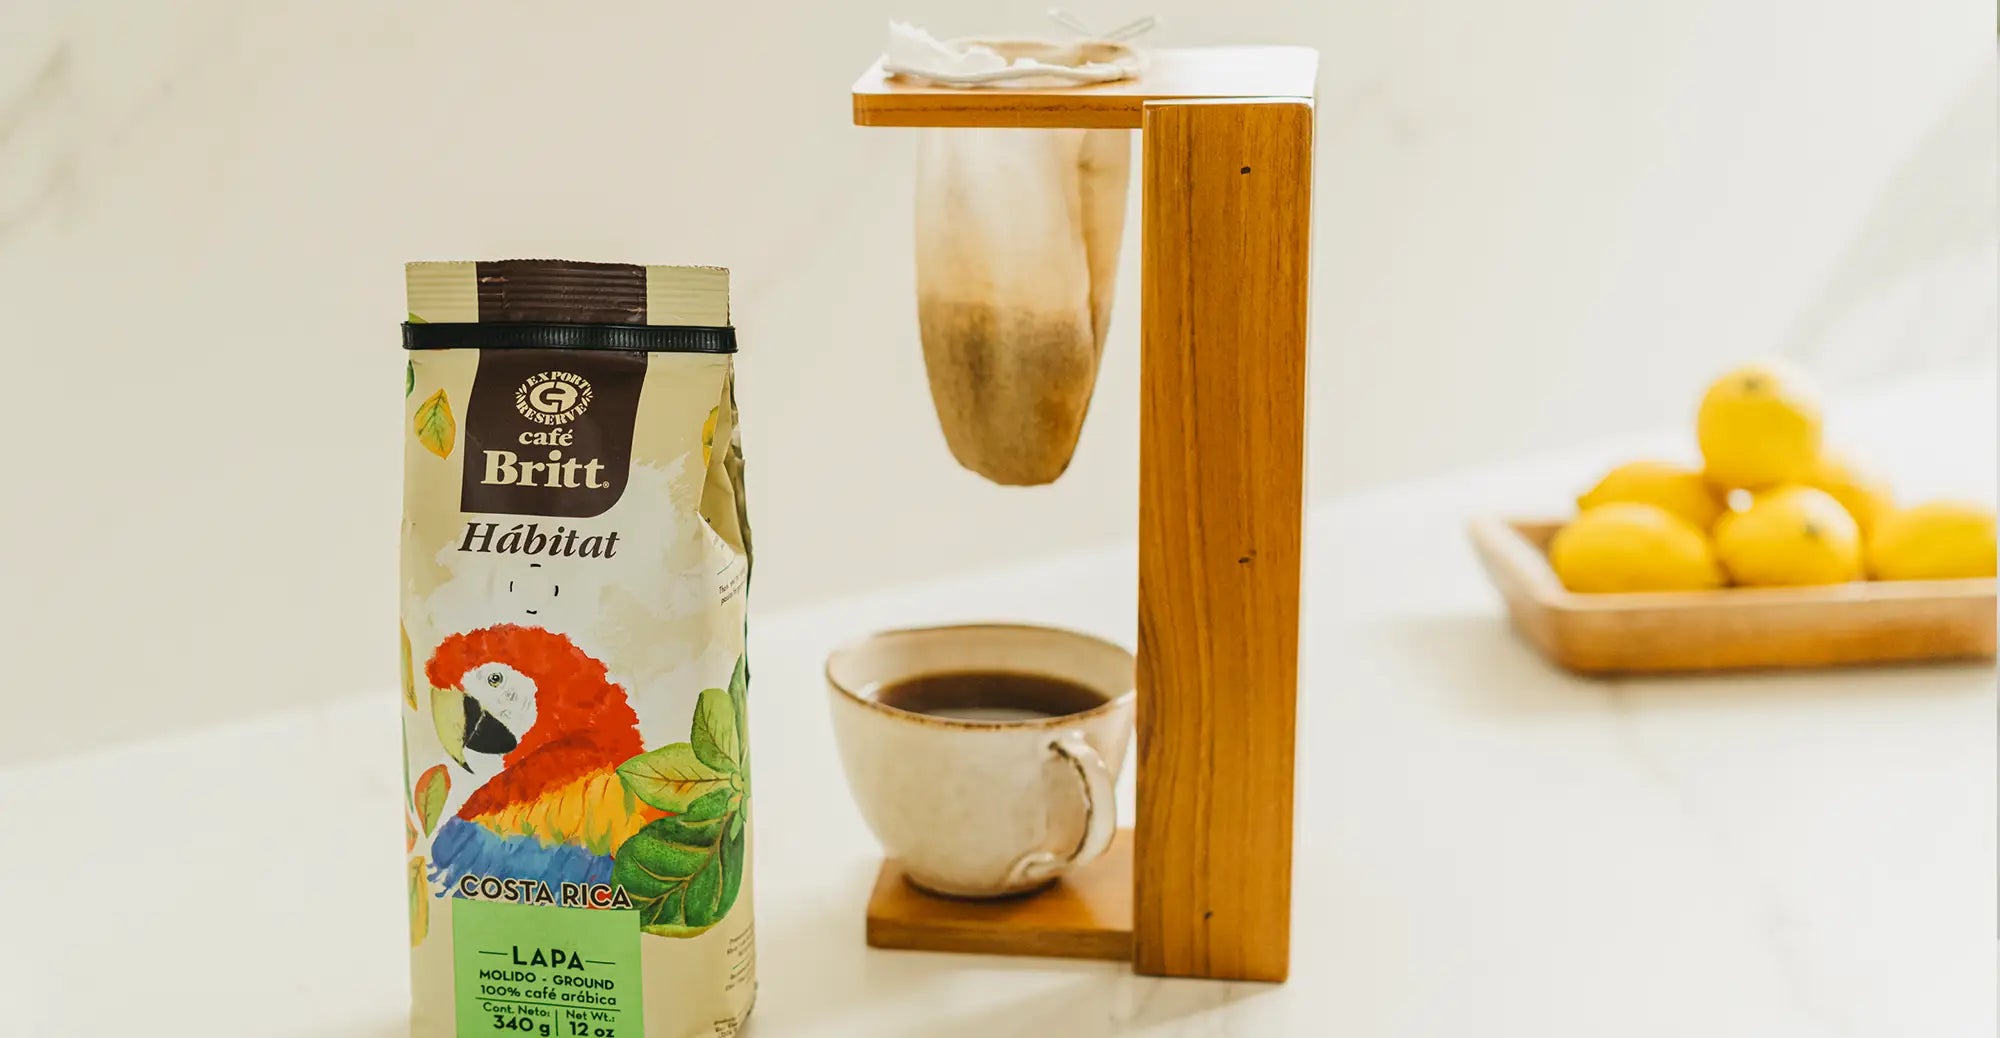  Handmade Portable Foldable Wooden Stand Coffee Maker -  CHORREADOR DE CAFE - Made with Resin and Central America Wood by a  Craftsman in Costa Rica. Sloth and Butterfly Design. Includes Cloth